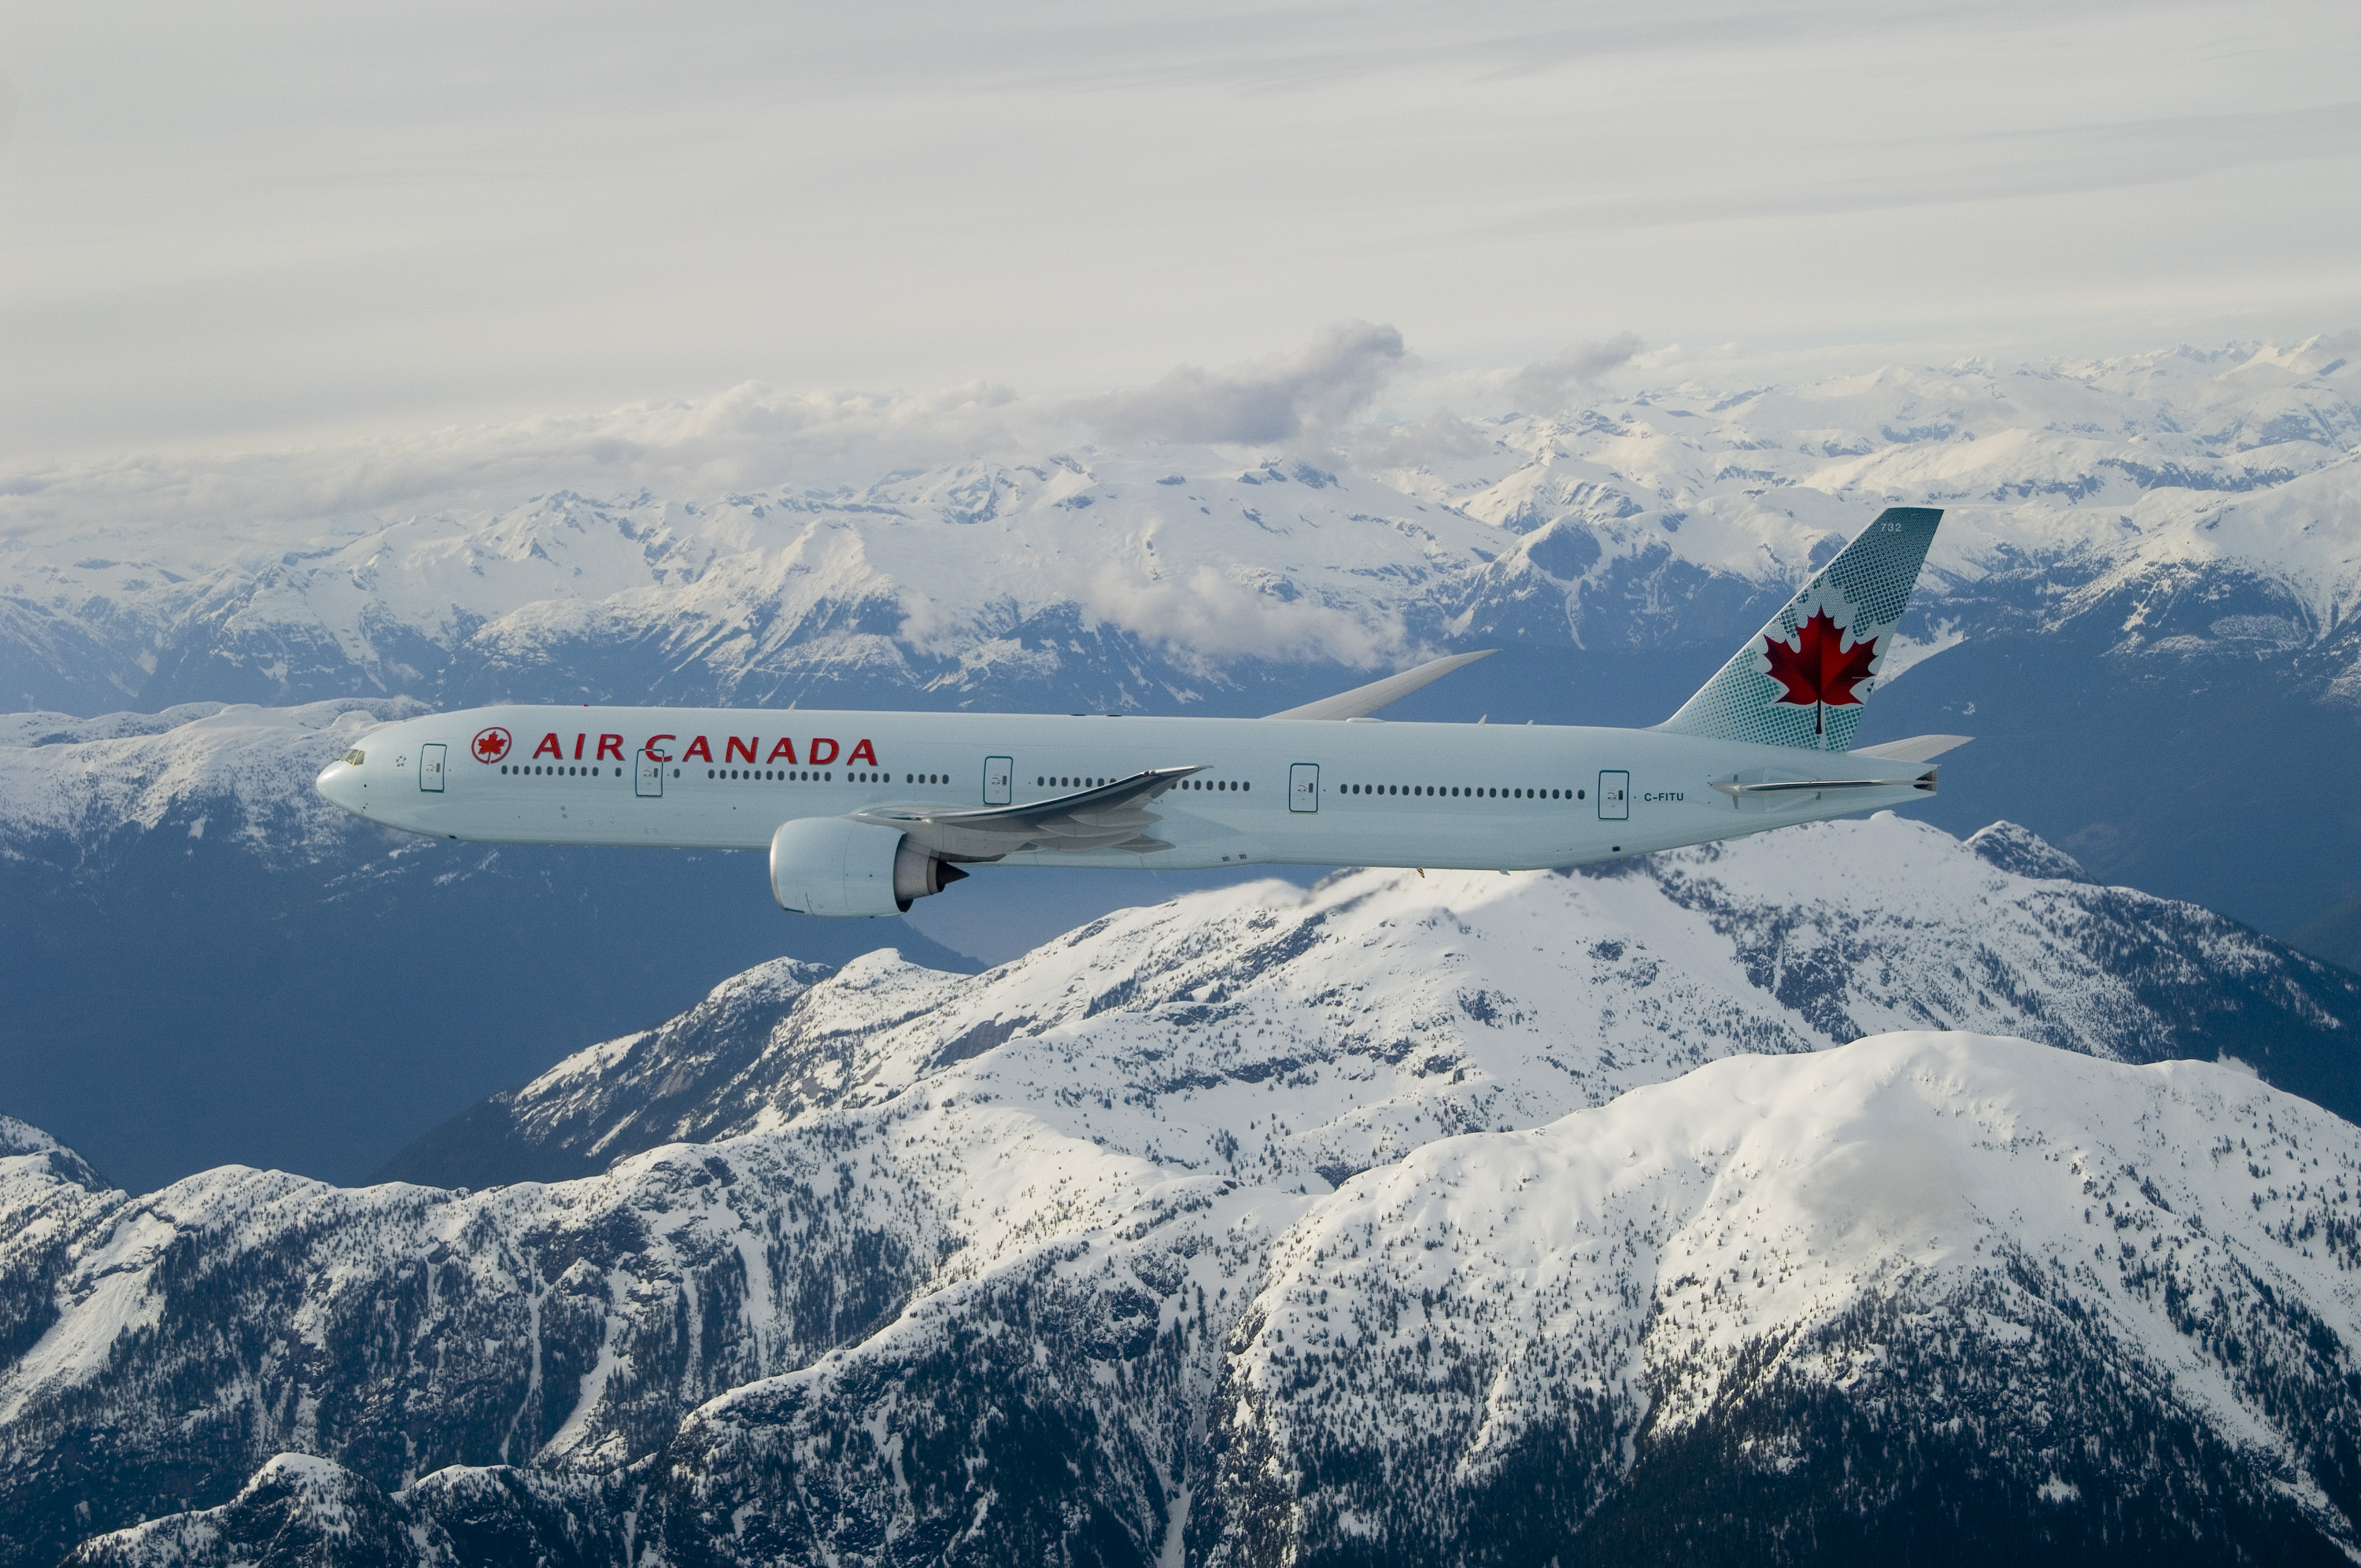 Air Canada Premium Economy Yyz Dxb On Boeing 777 300er Images, Photos, Reviews